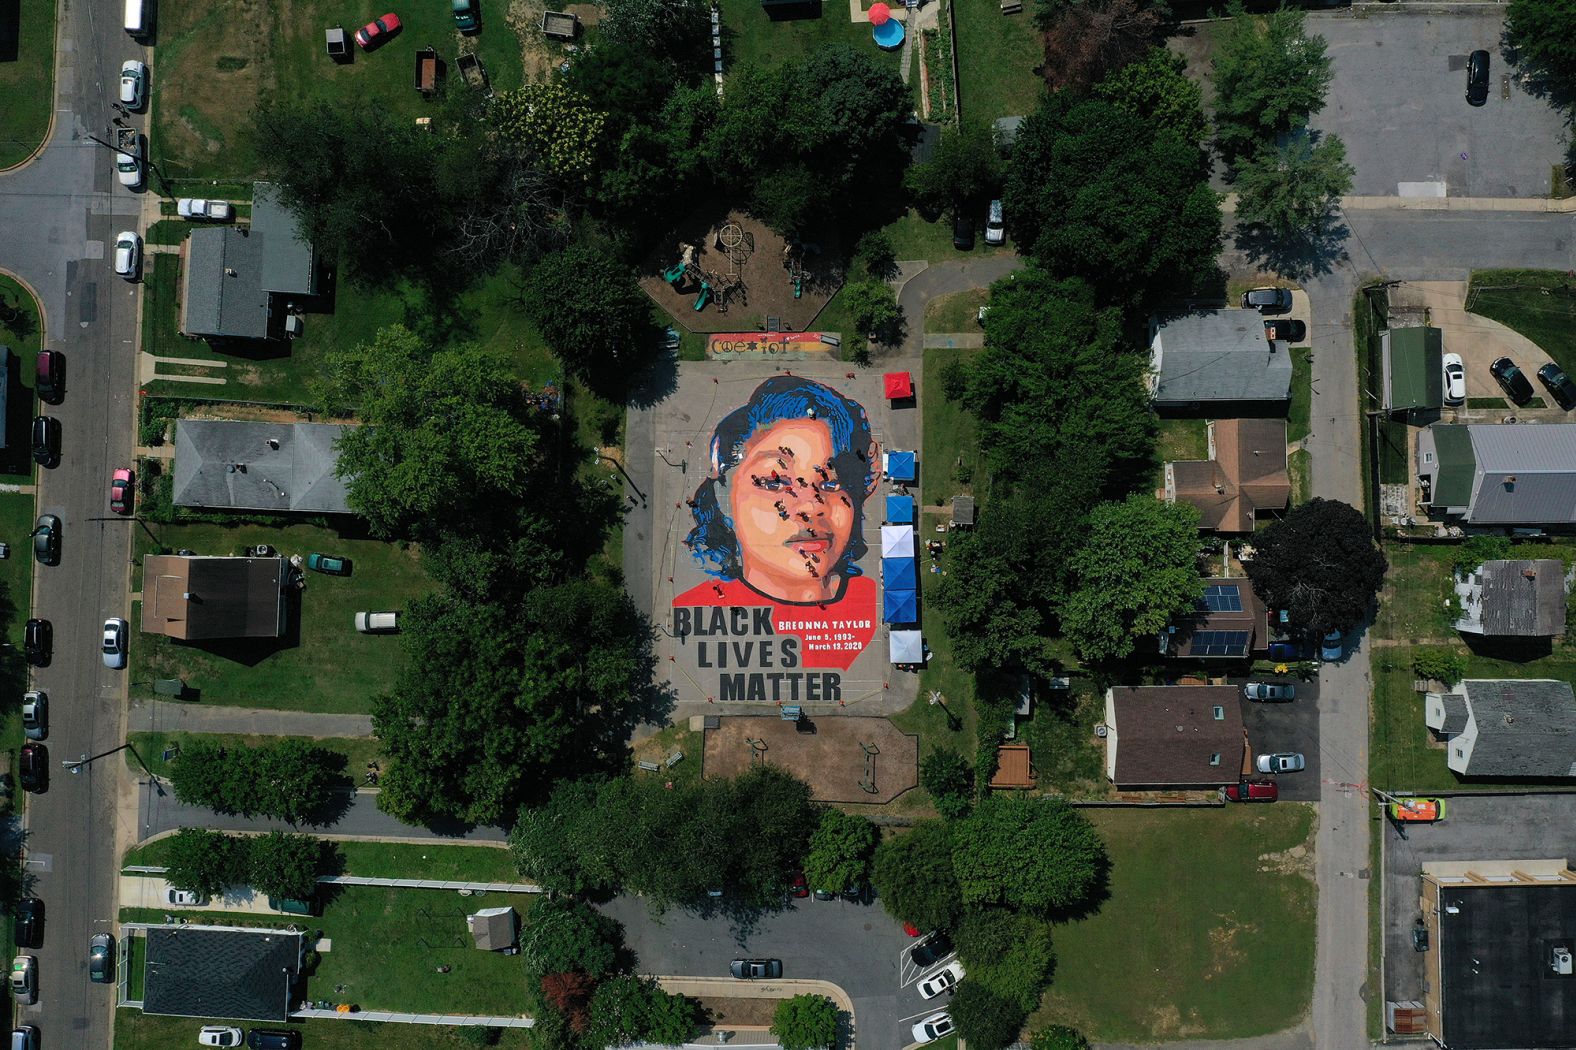 Artists and volunteers descended on a basketball court in a historically Black neighborhood of Annapolis, Maryland, <a href="index.php?page=&url=https%3A%2F%2Fwww.cnn.com%2F2020%2F07%2F06%2Fus%2Fbreonna-taylor-mural-trnd%2Findex.html" target="_blank">to paint a 7,000-square-foot mural of Breonna Taylor</a> over the Fourth of July weekend. The project was led by Annapolis-based Future History Now, a nonprofit art collective that creates murals with youth facing adversity in underserved communities.